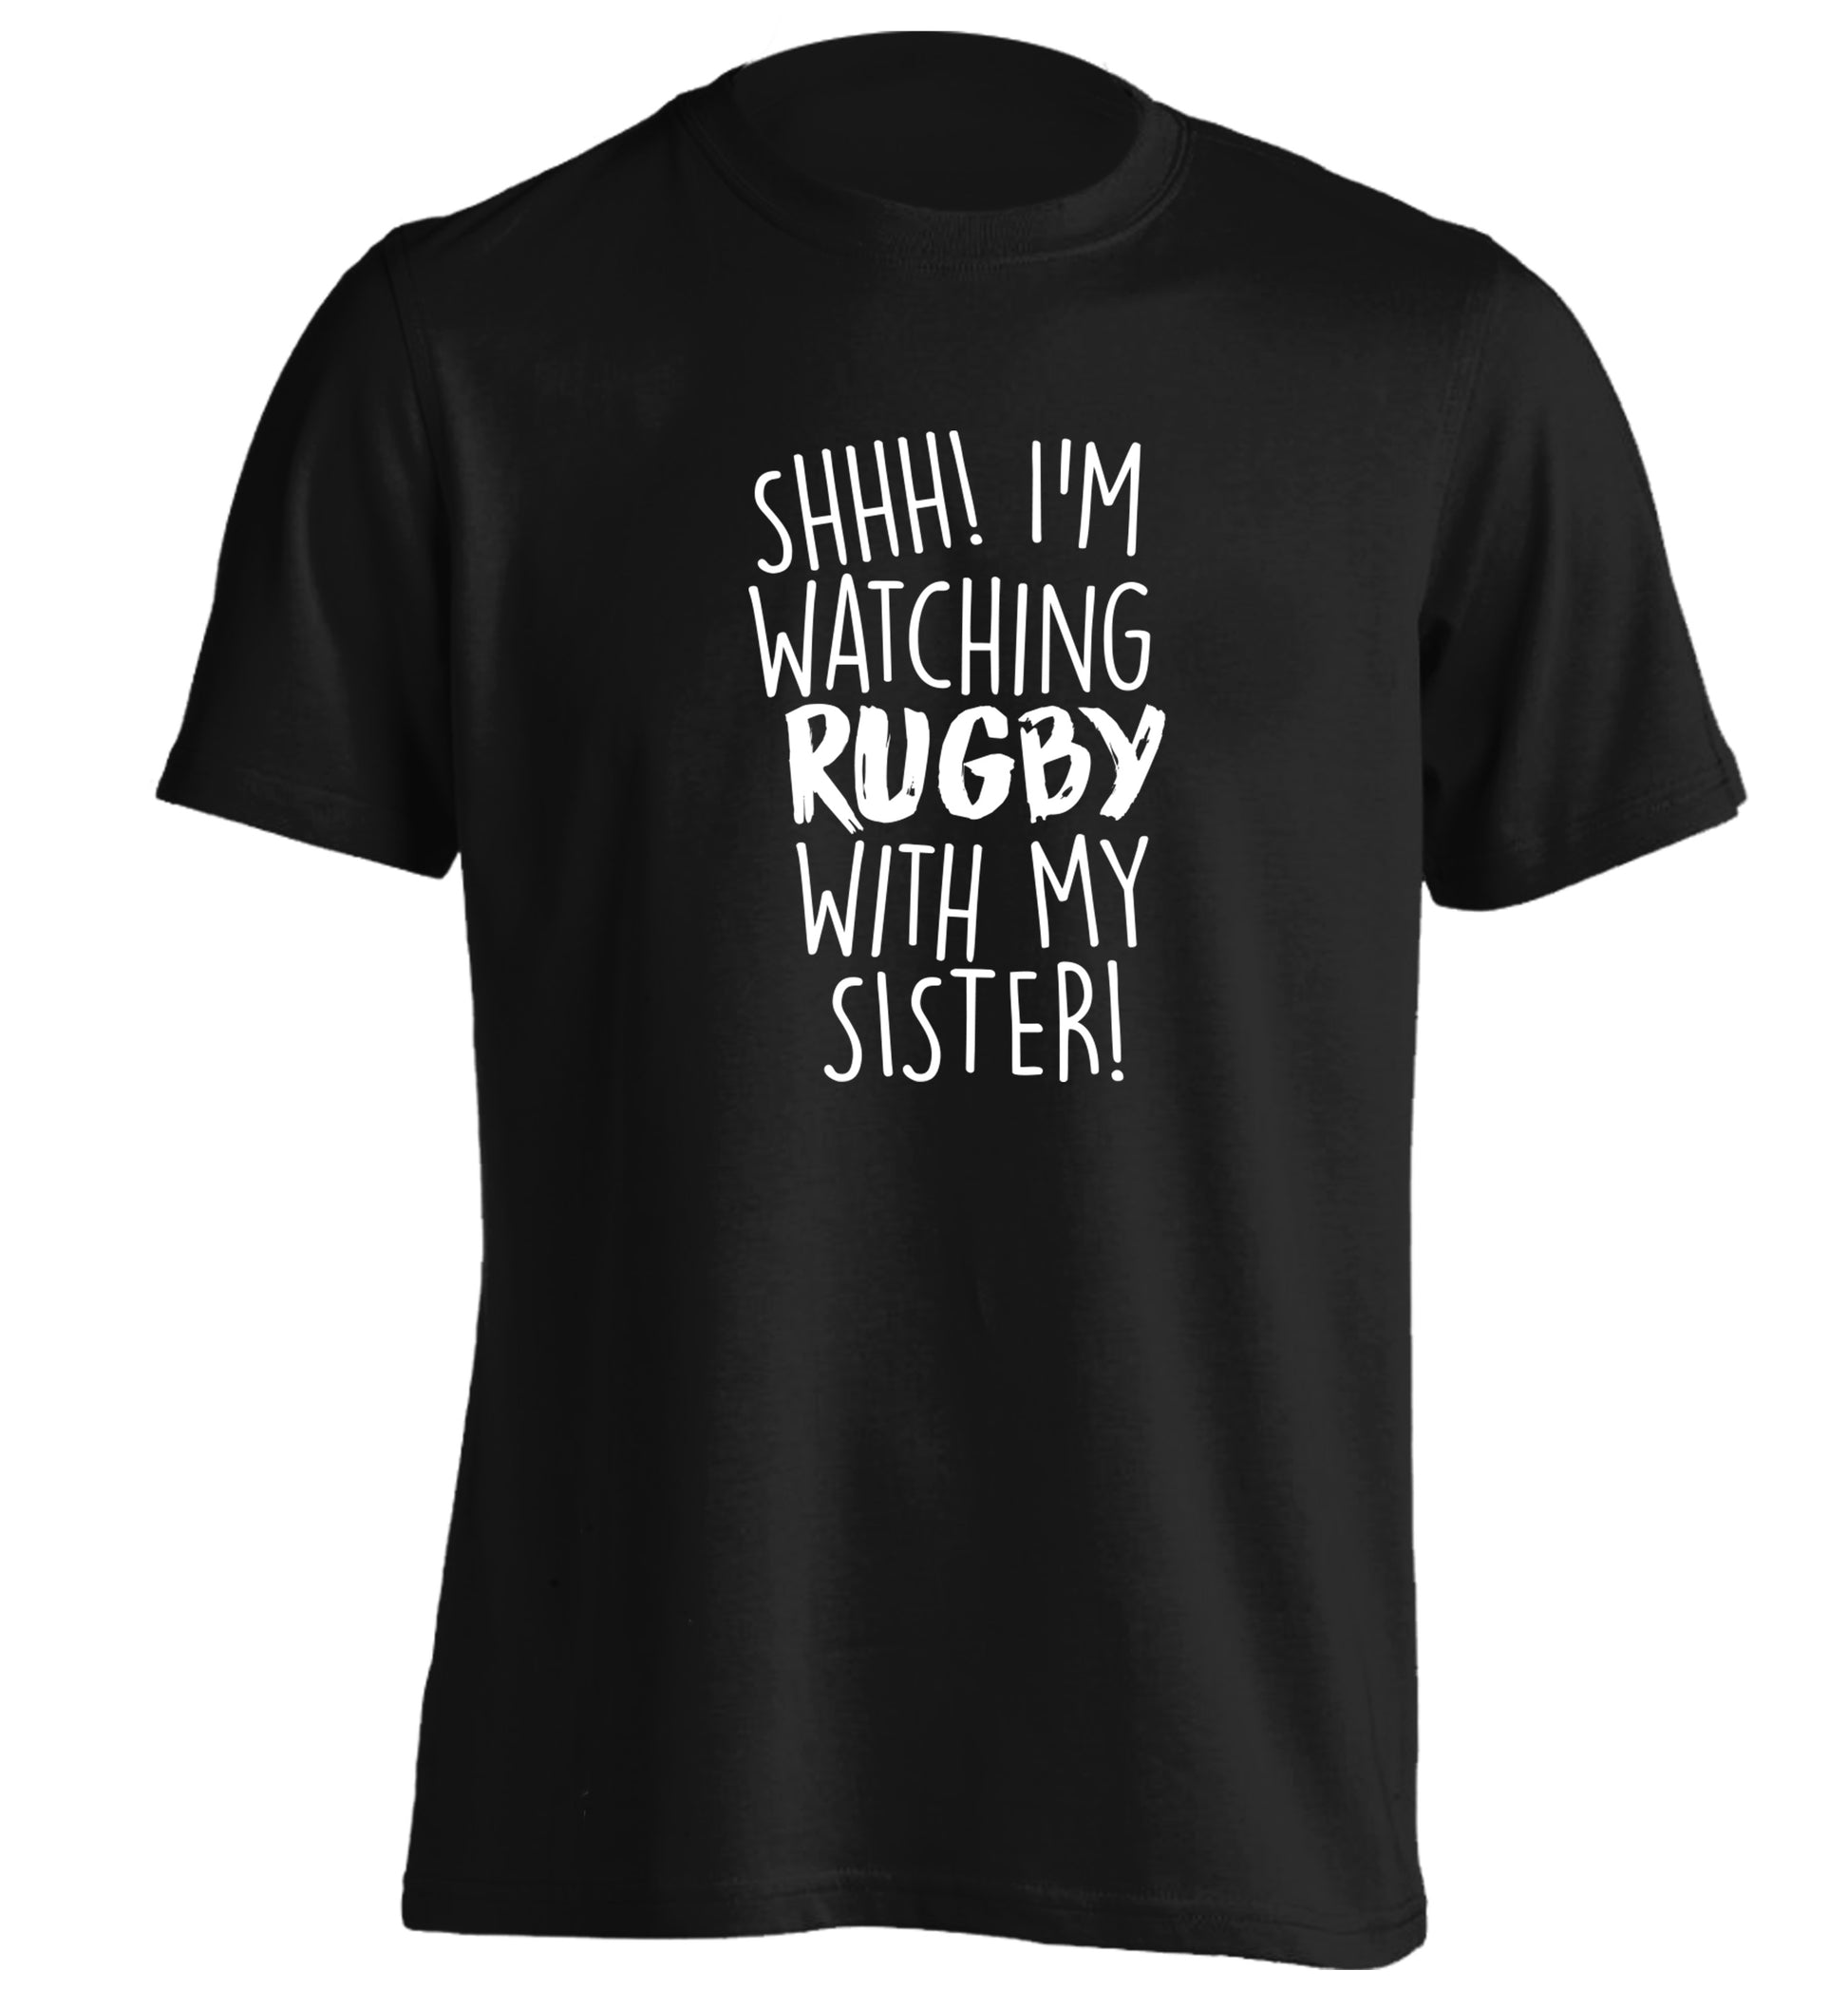 Shh... I'm watching rugby with my sister adults unisex black Tshirt 2XL